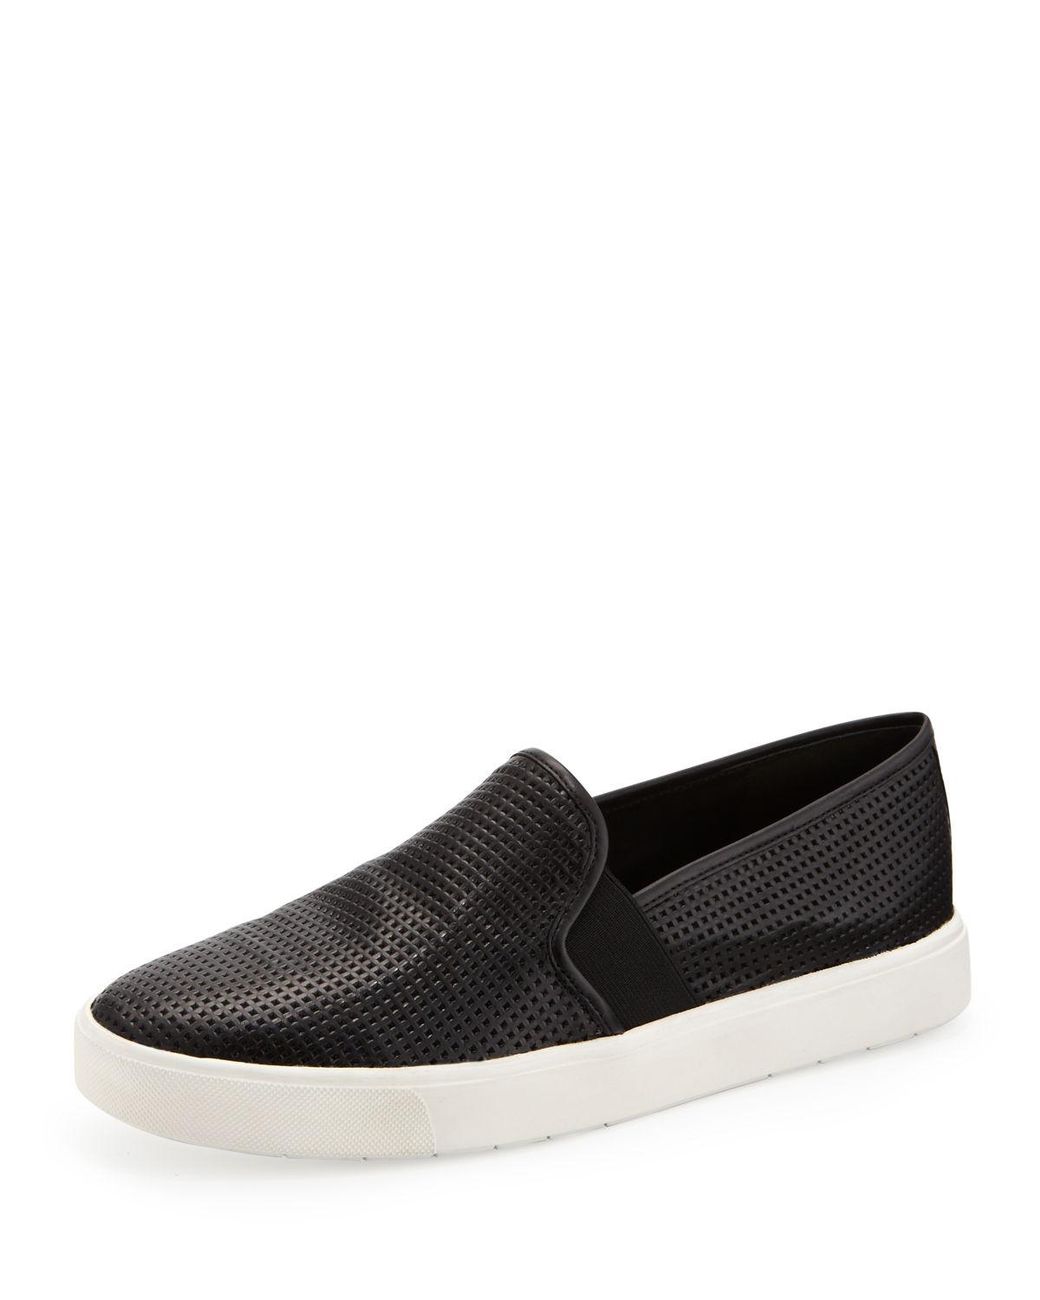 vince perforated slip on